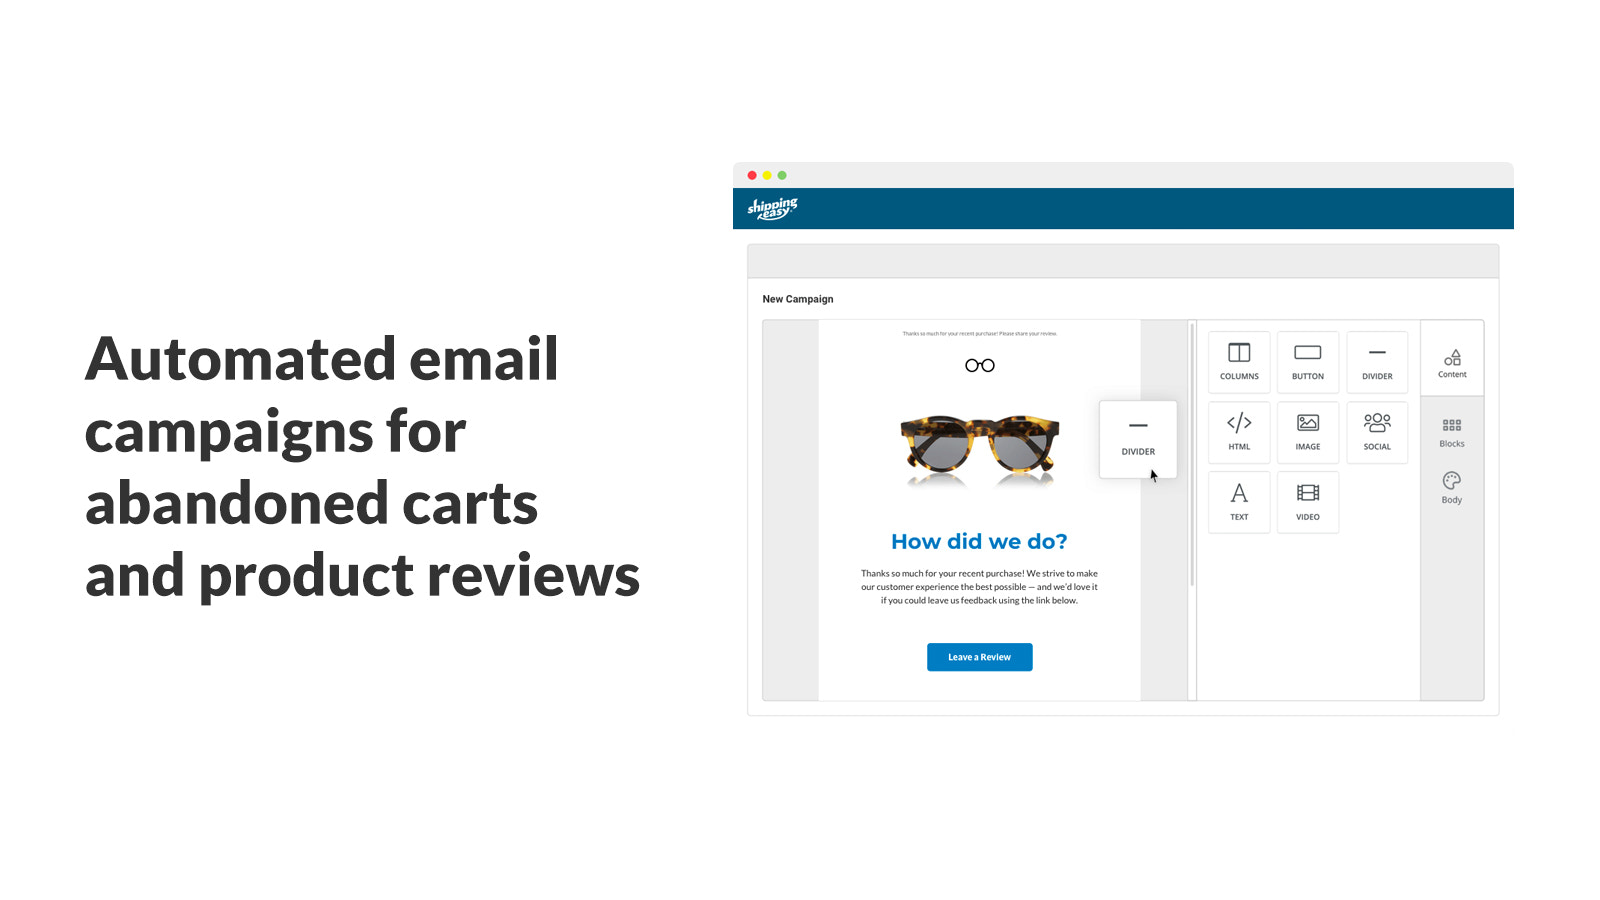 Automated email campaigns abandoned carts and product reviews